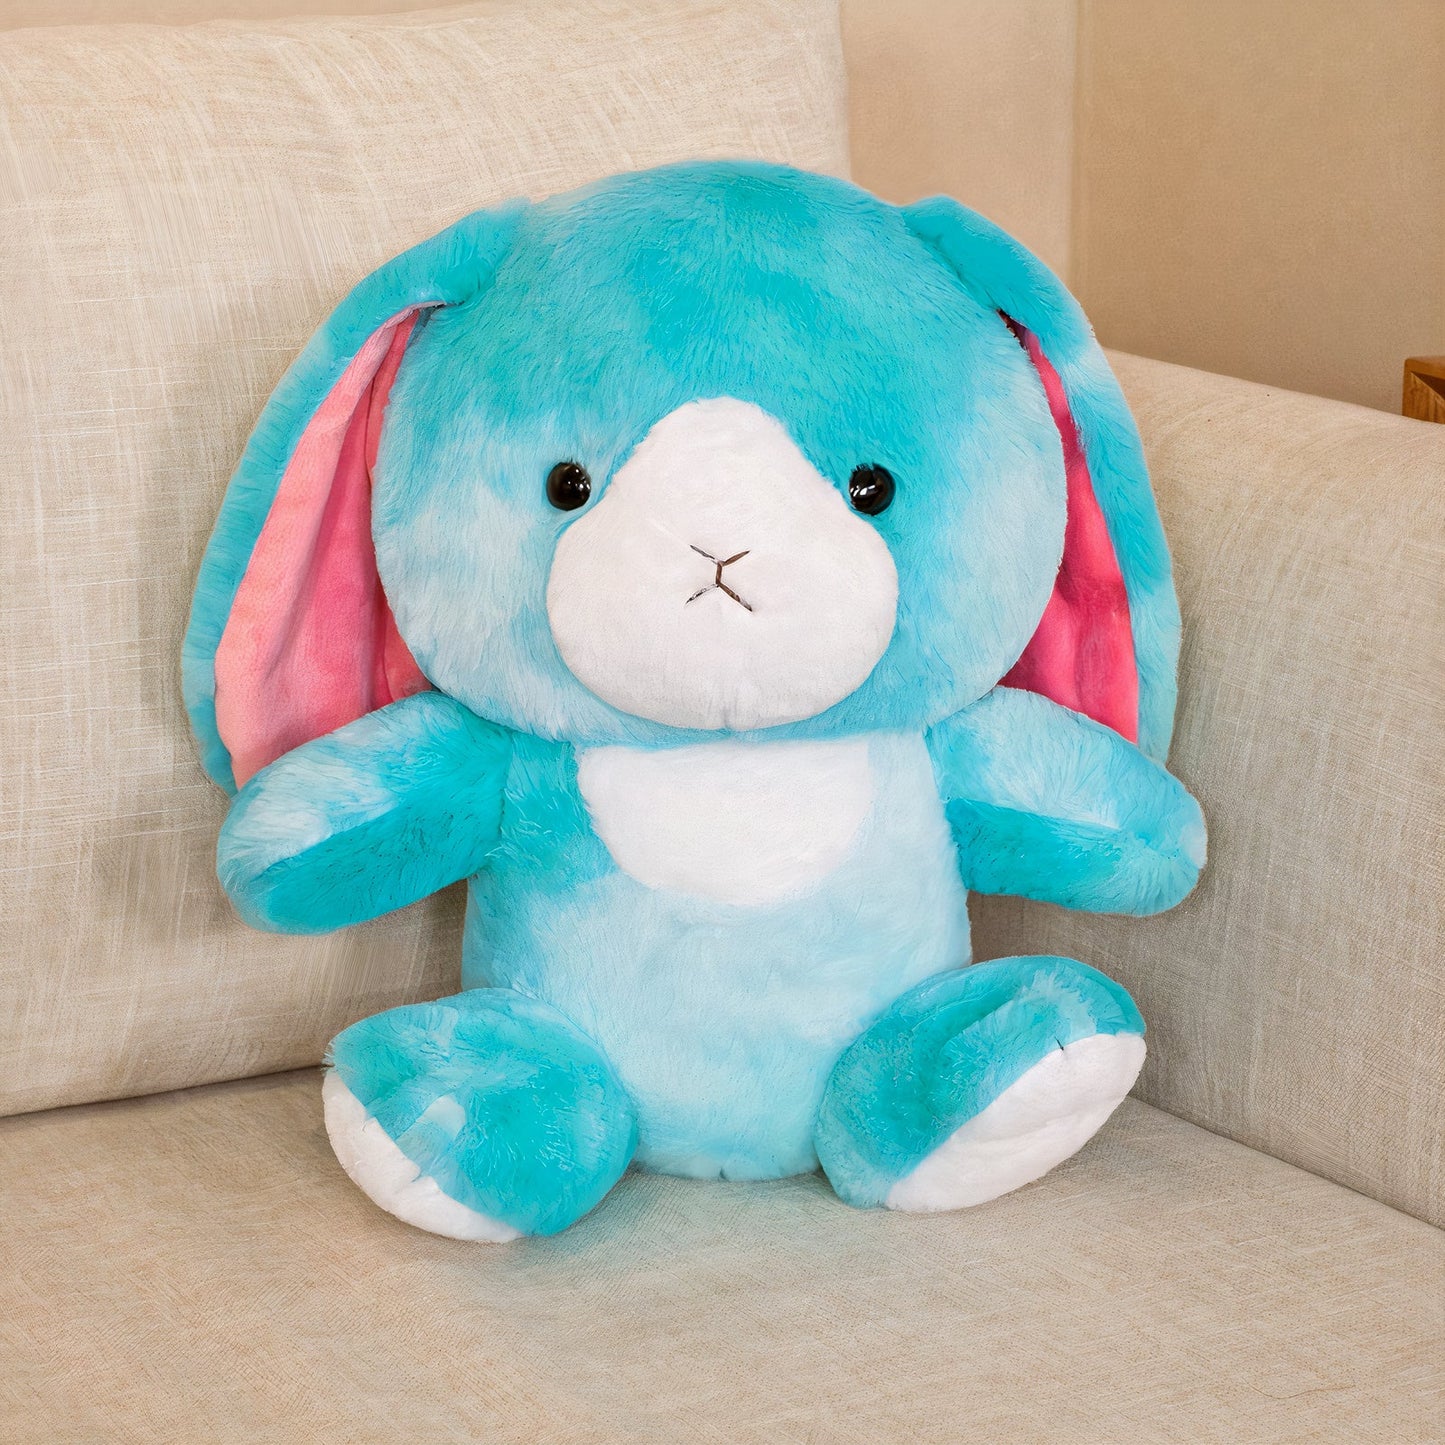 Plumpy Hopper the Colorful Bunny Plushie